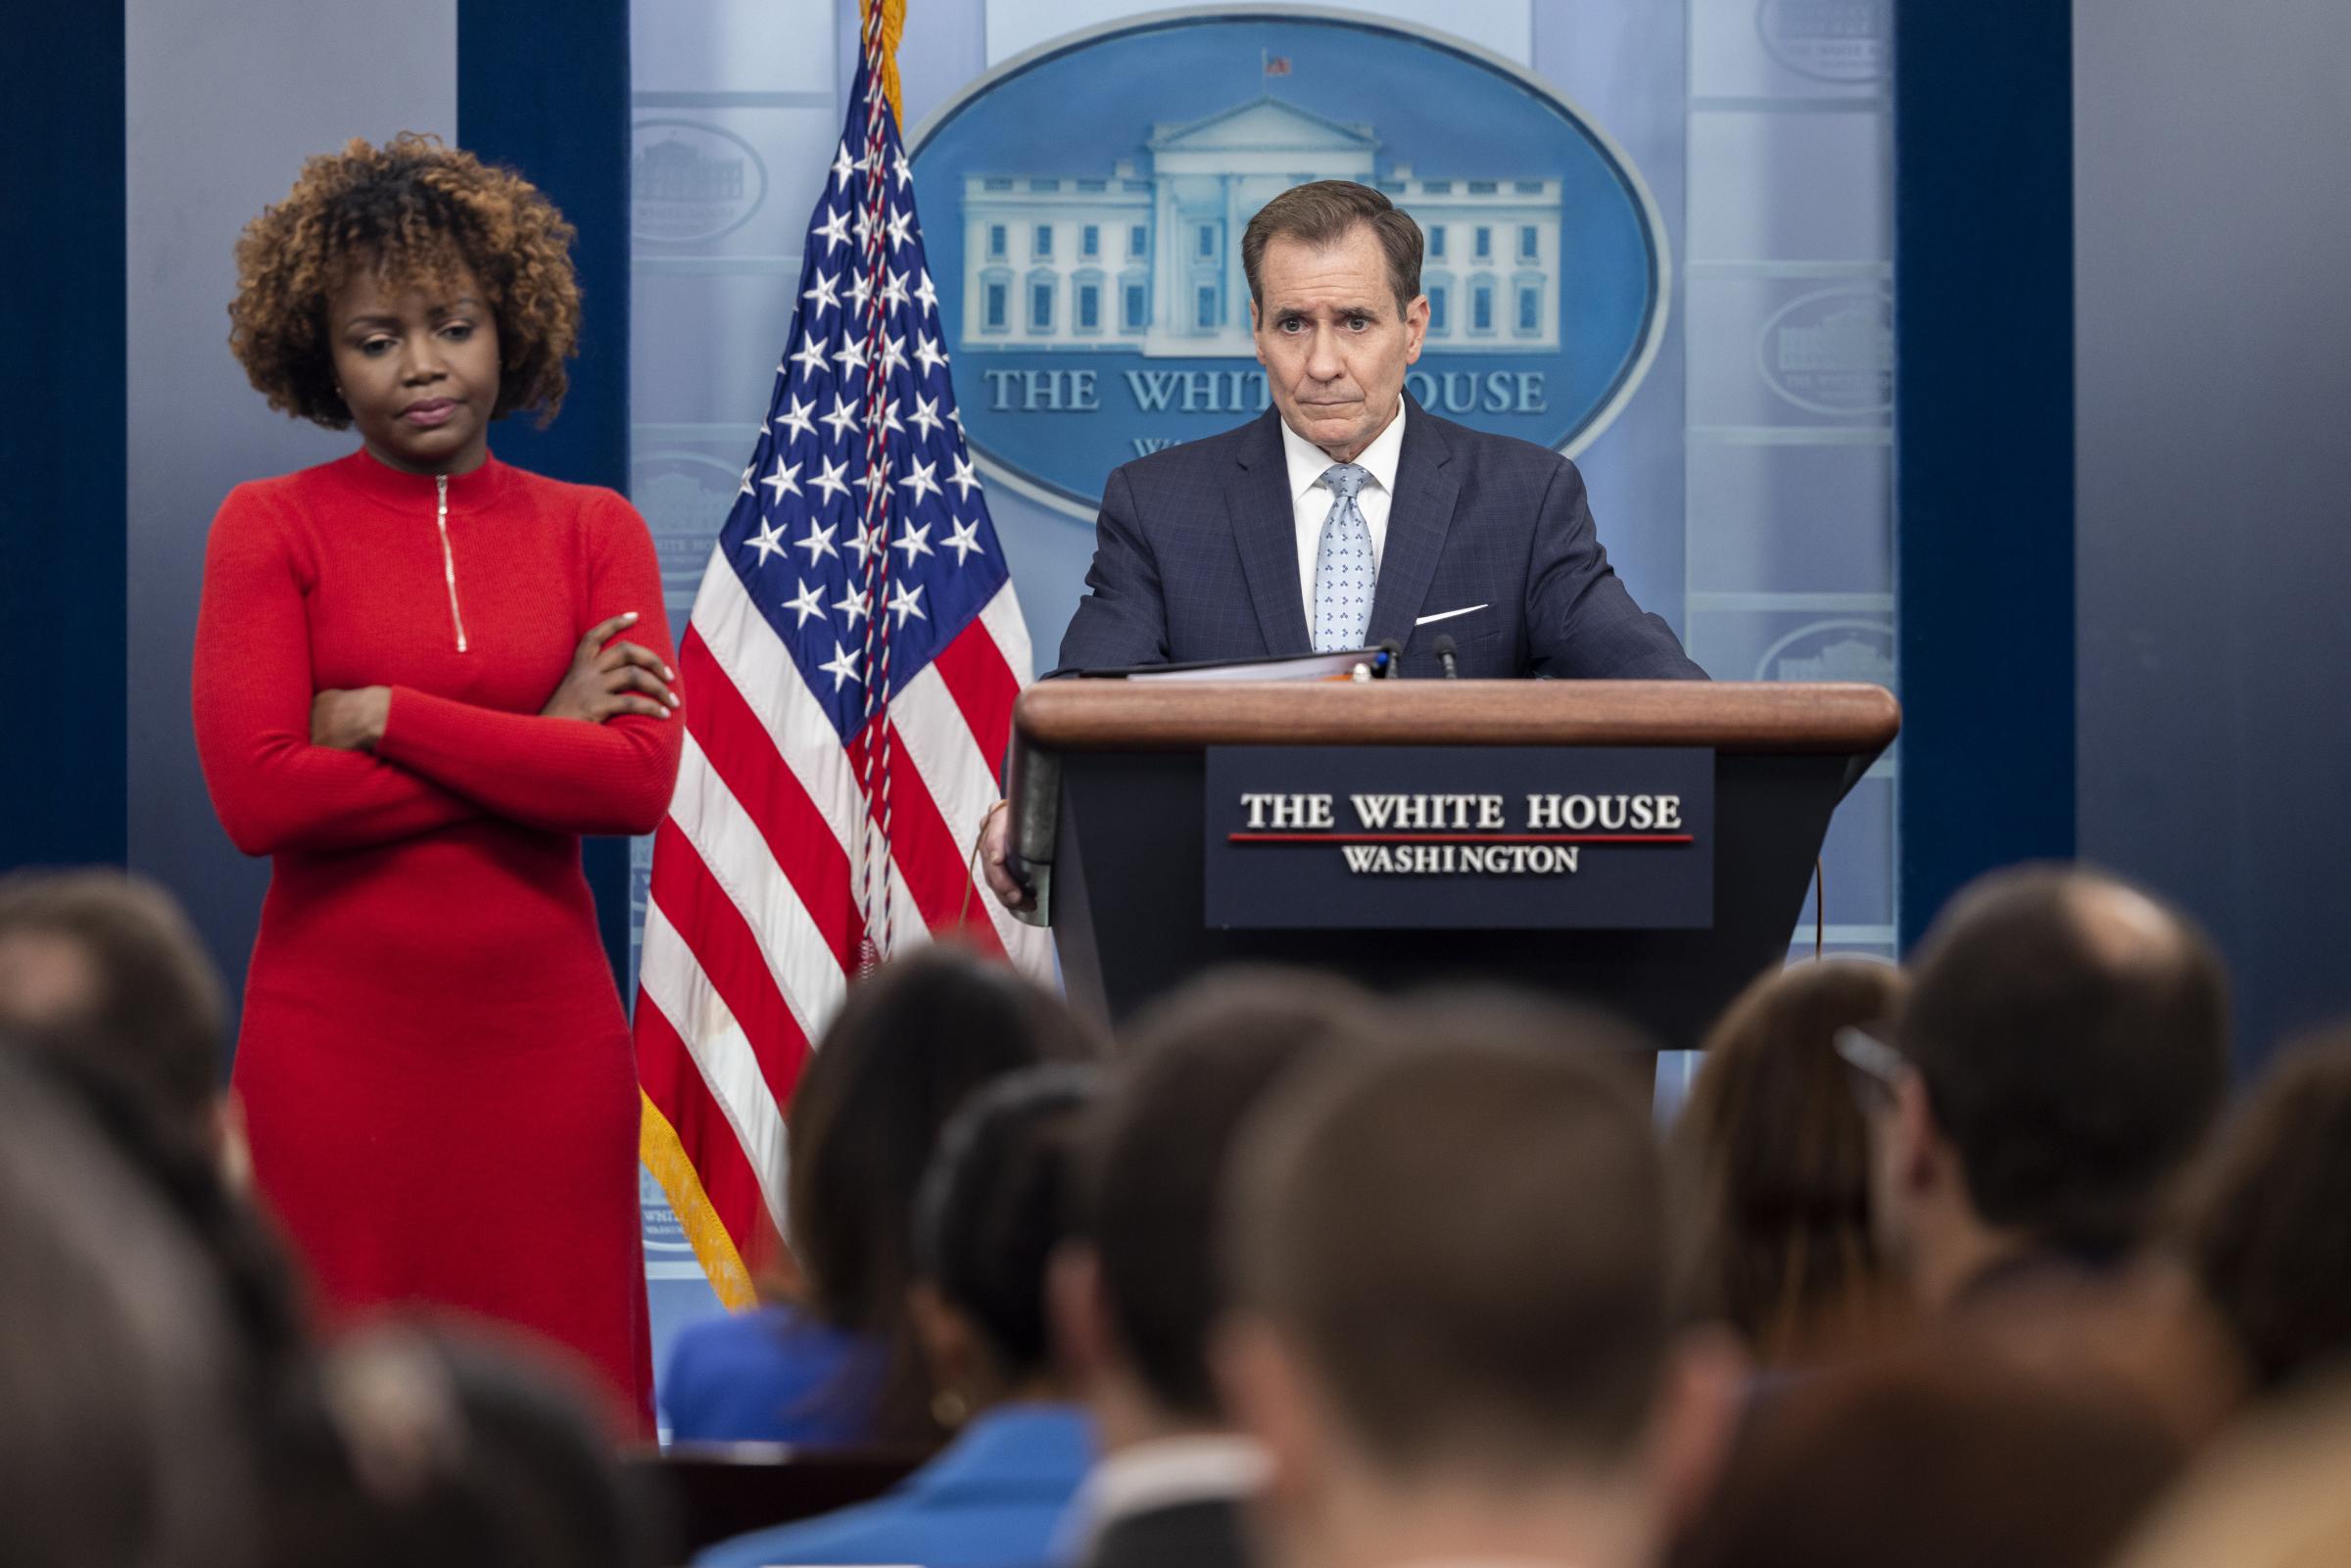 WASHINGTON, DC UNITED STATES- FEBRUARY 13:National Security Council Coordinator Admiral John Kirby speaks at a White House Press Briefing following the U.S. downing of a number of Unidentified Aerial Phenomenas (UAPs), at the White House on February